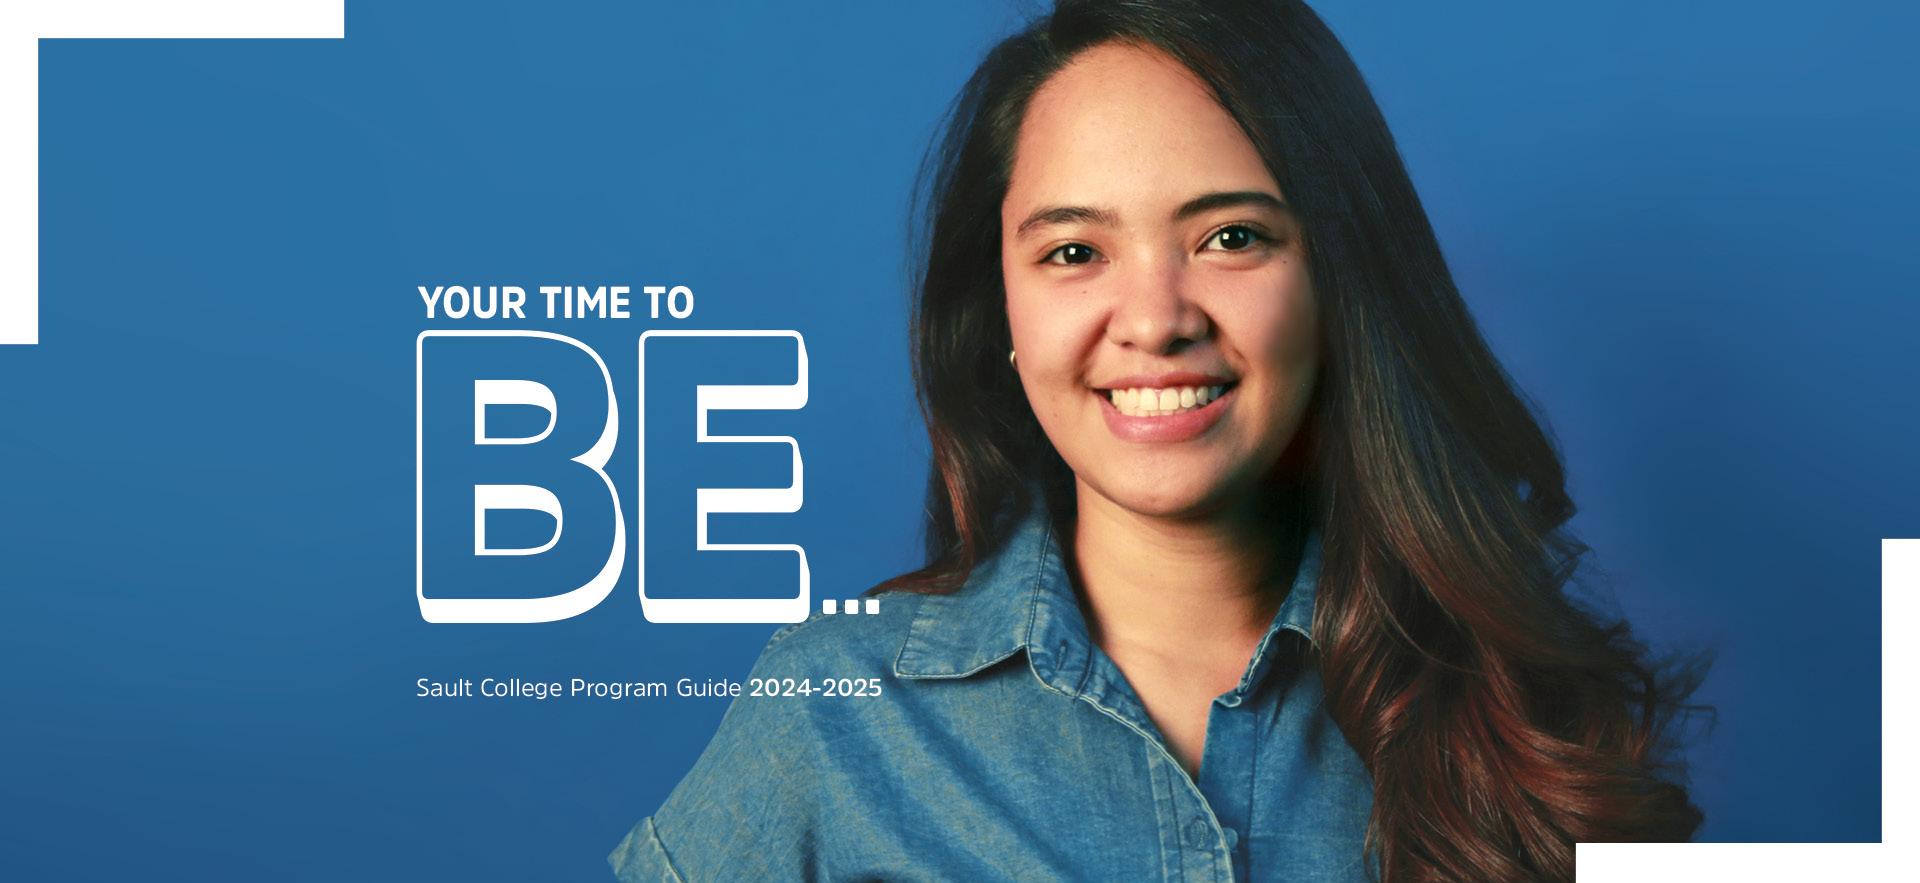 Female student in blue shirt smiling with blue background and text overlay "your time to BE..." for 91探花 Program Guide for 2024-25